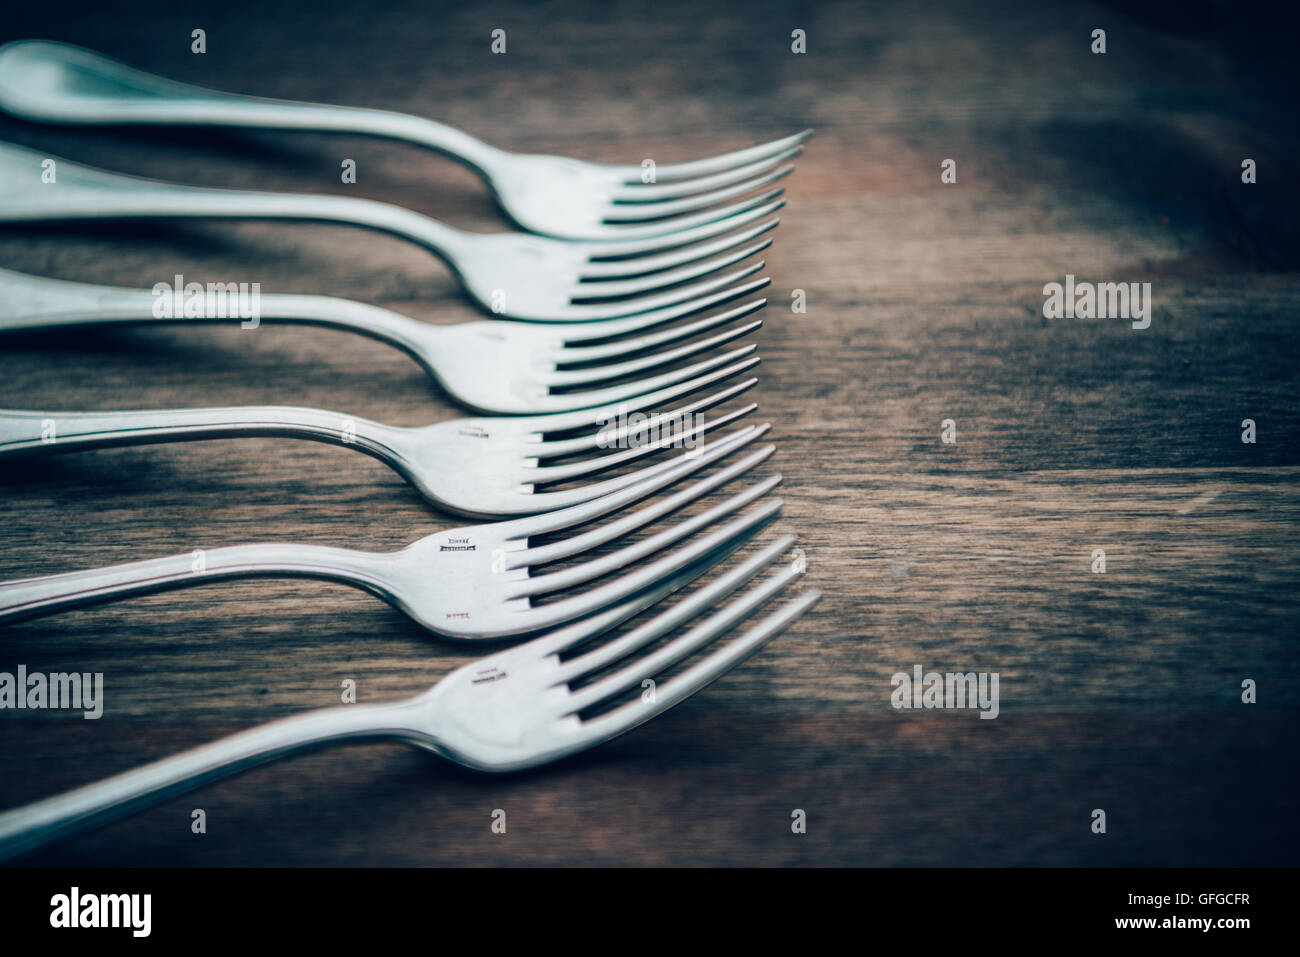 Forks arranged on wooden tabletop Stock Photo